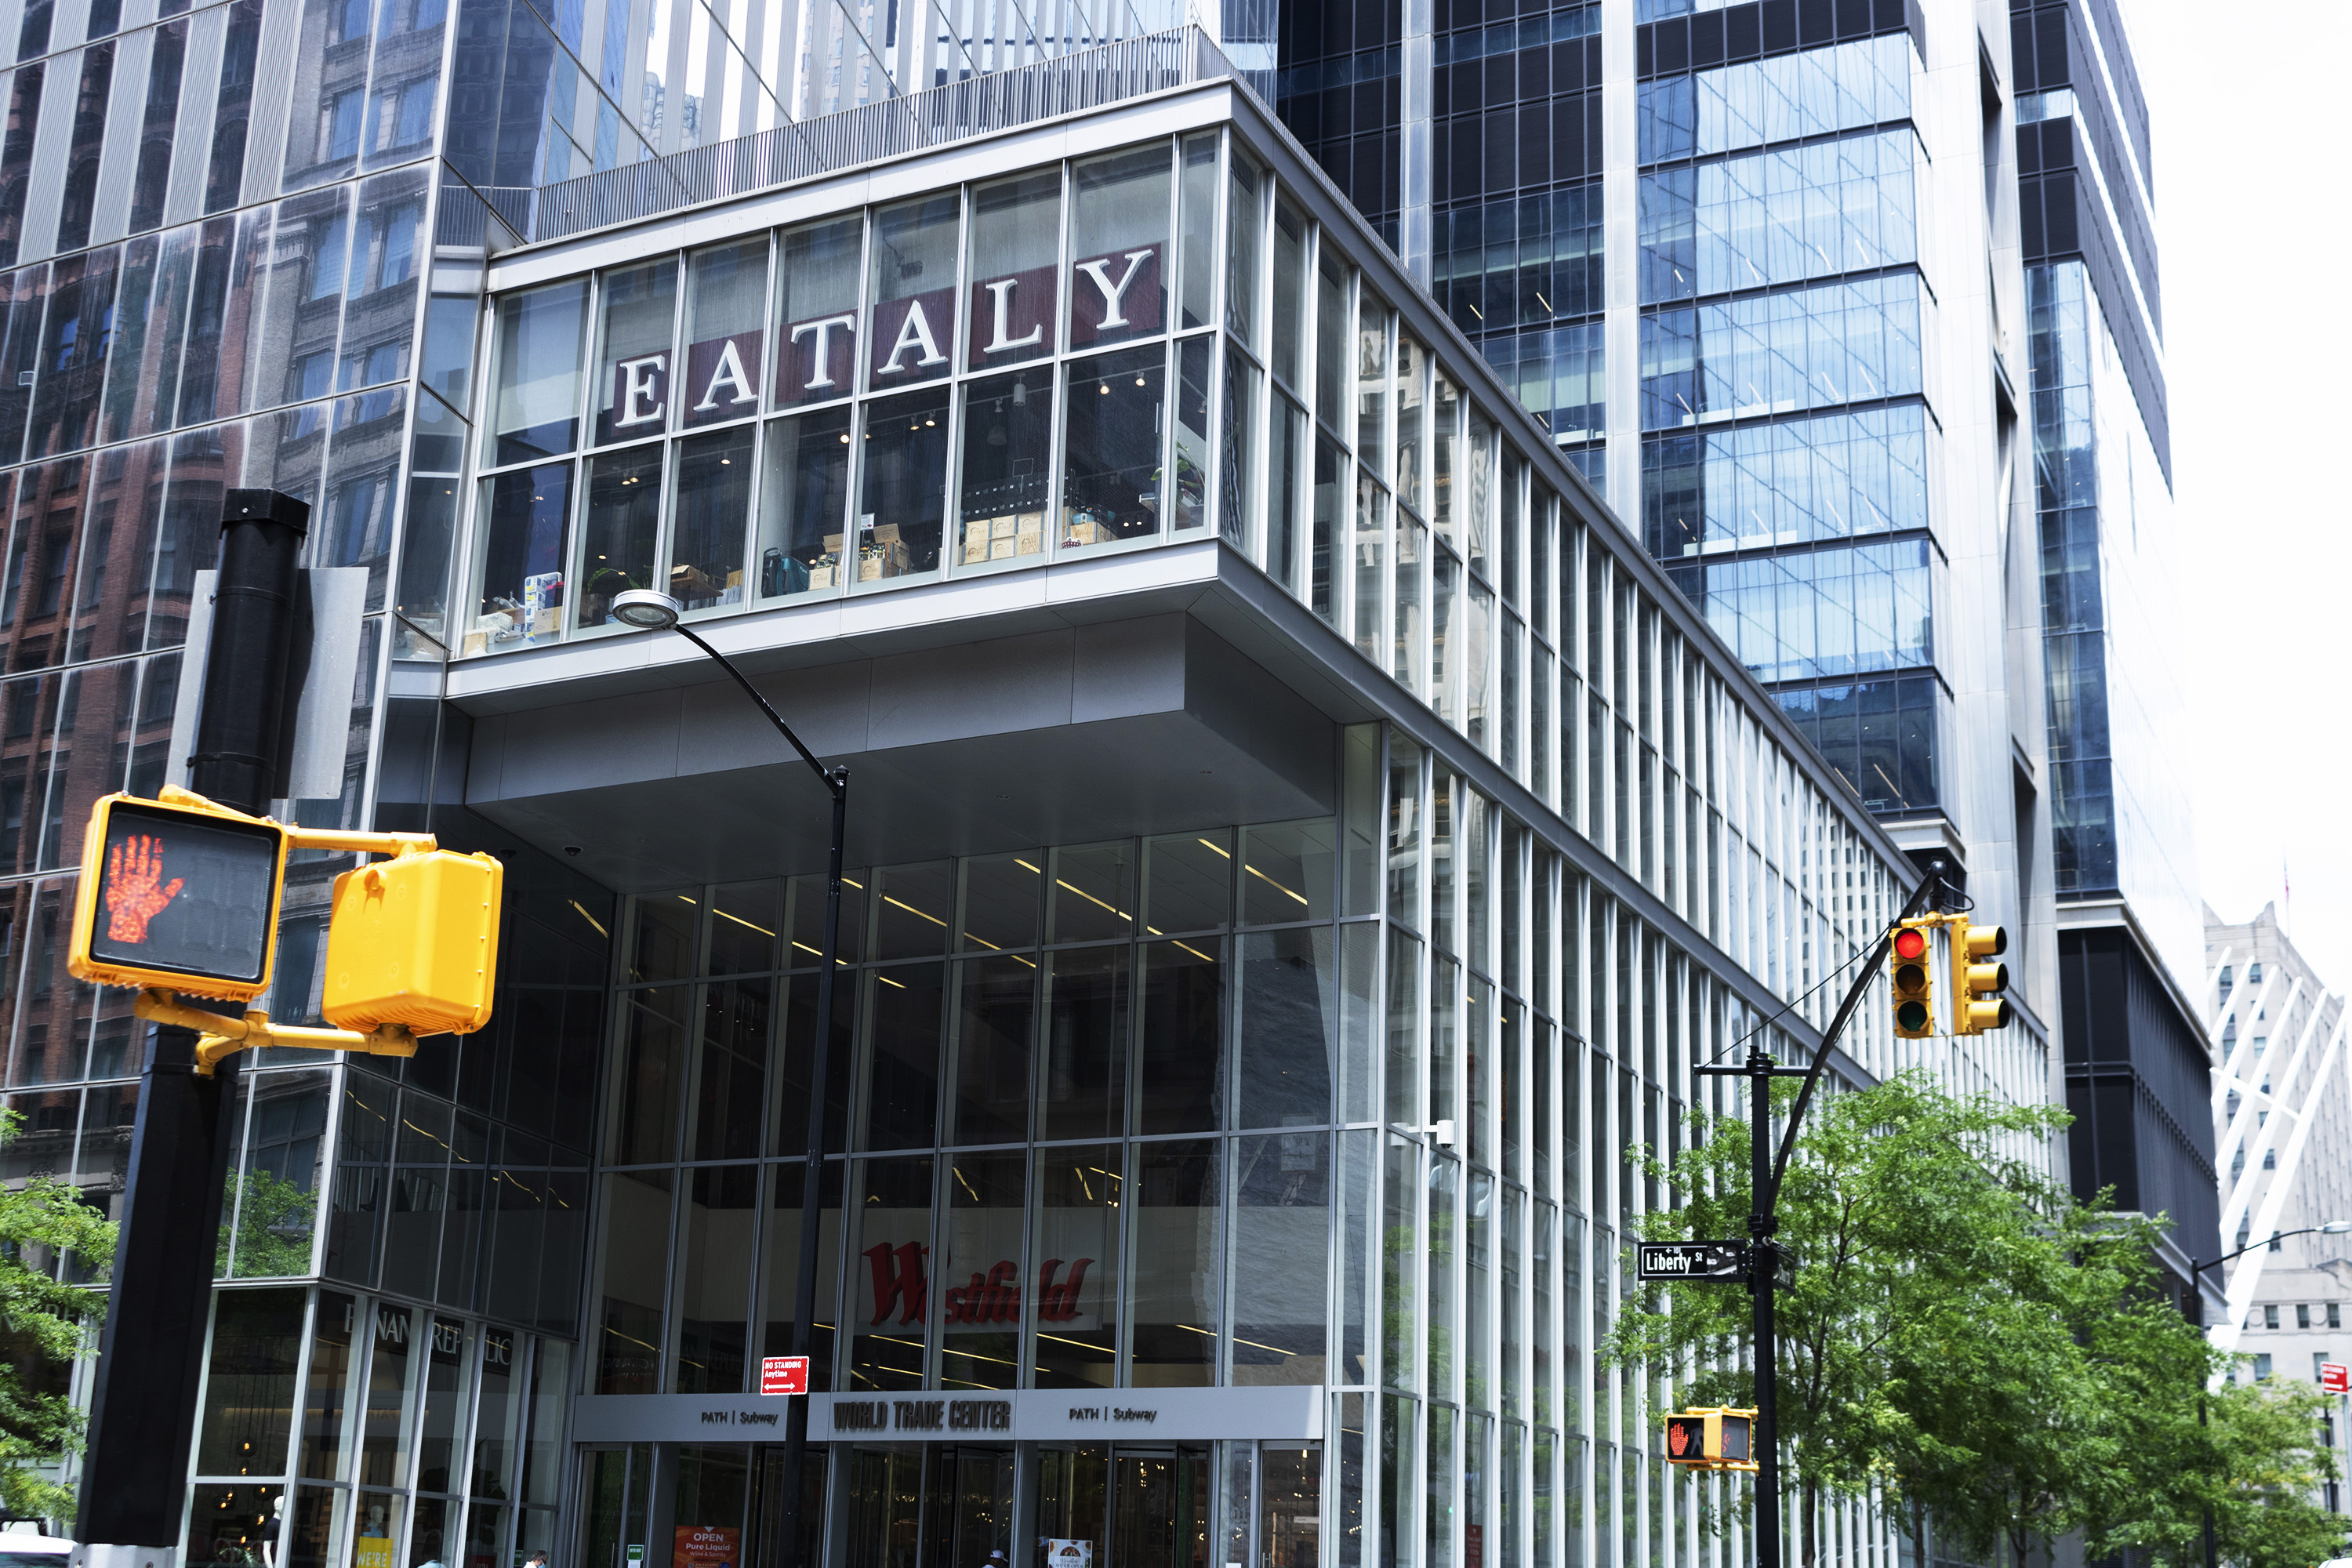 EATALY NYC DOWNTOWN - 3945 Photos & 1287 Reviews - 101 Liberty St